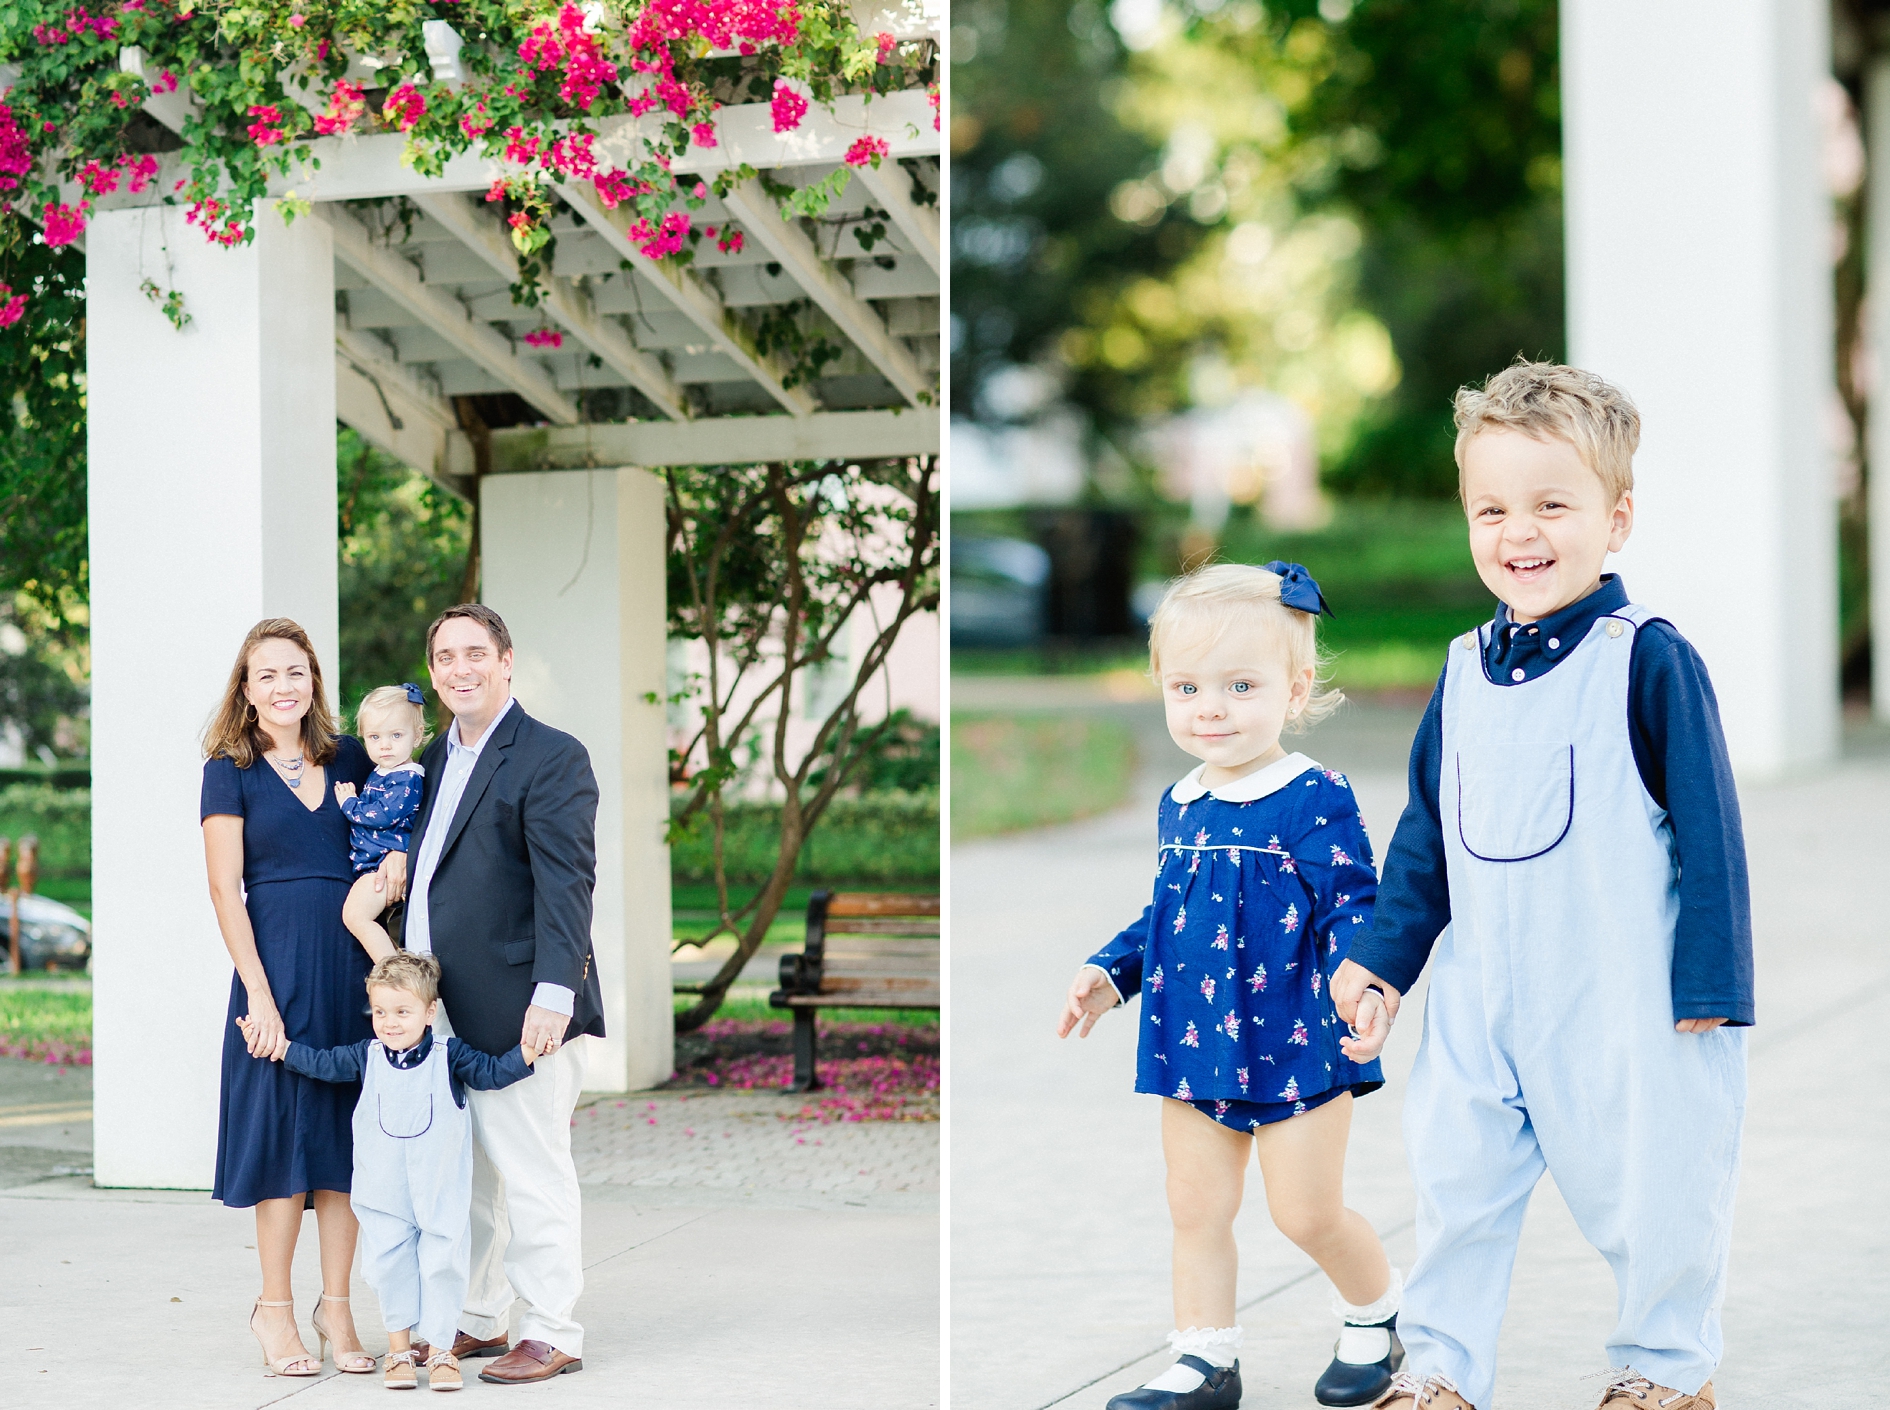 St. Pete Family Photographer | © Ailyn La Torre Photography 2017